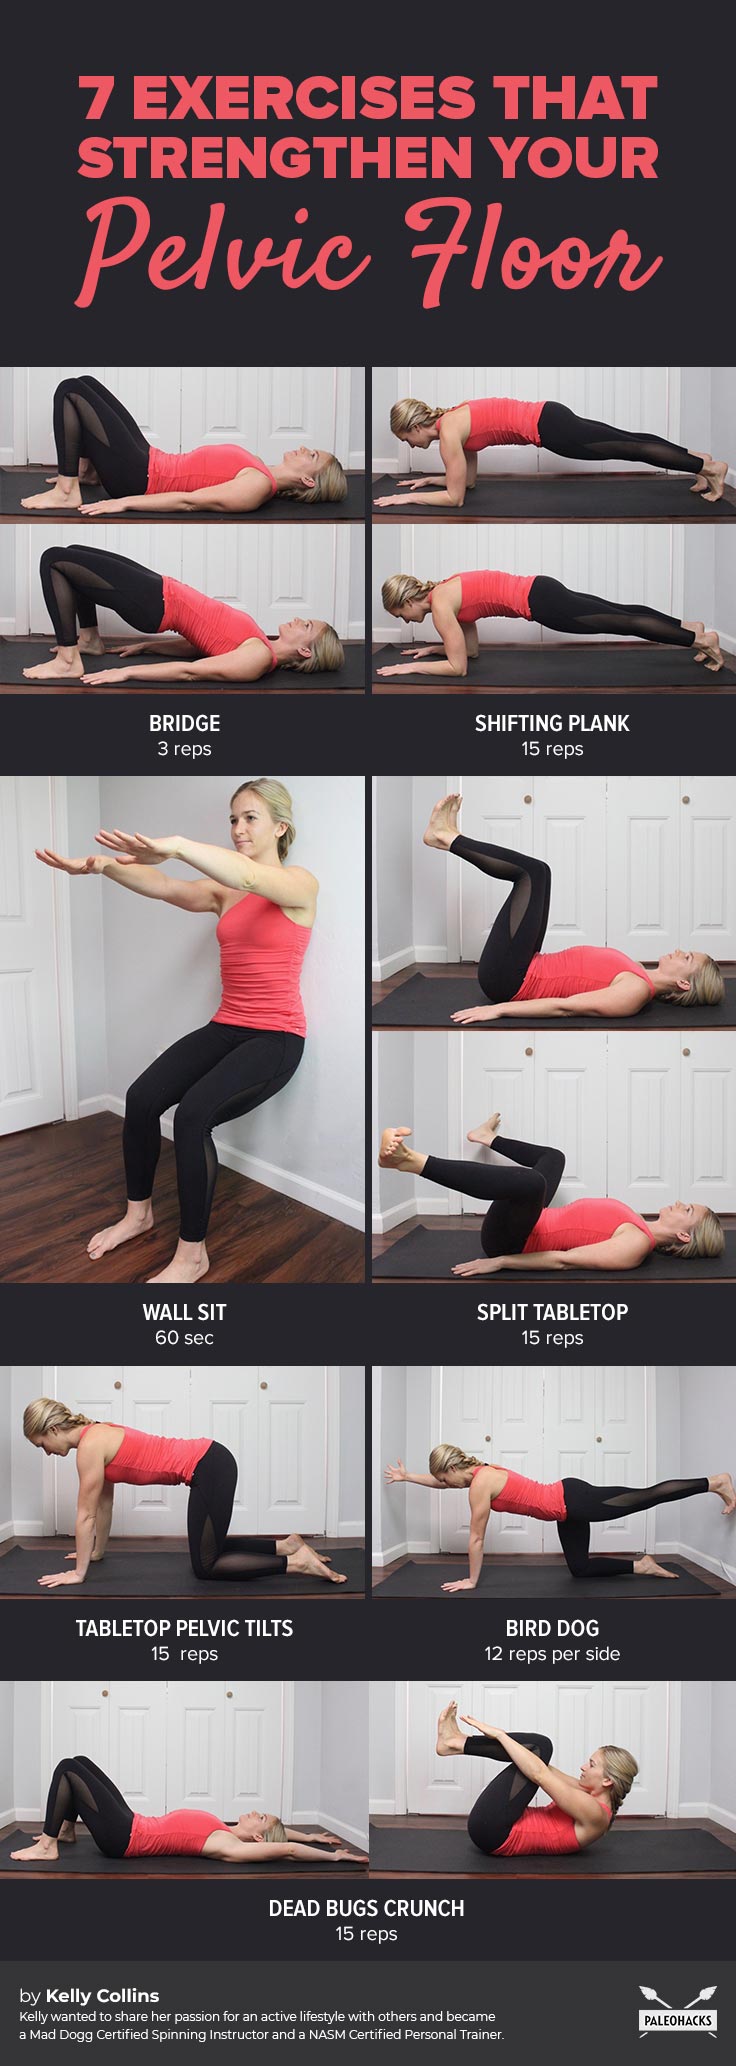 Add these strengthening pelvic floor exercises to your workout routine to improve your sex life and reduce your risk of incontinence.